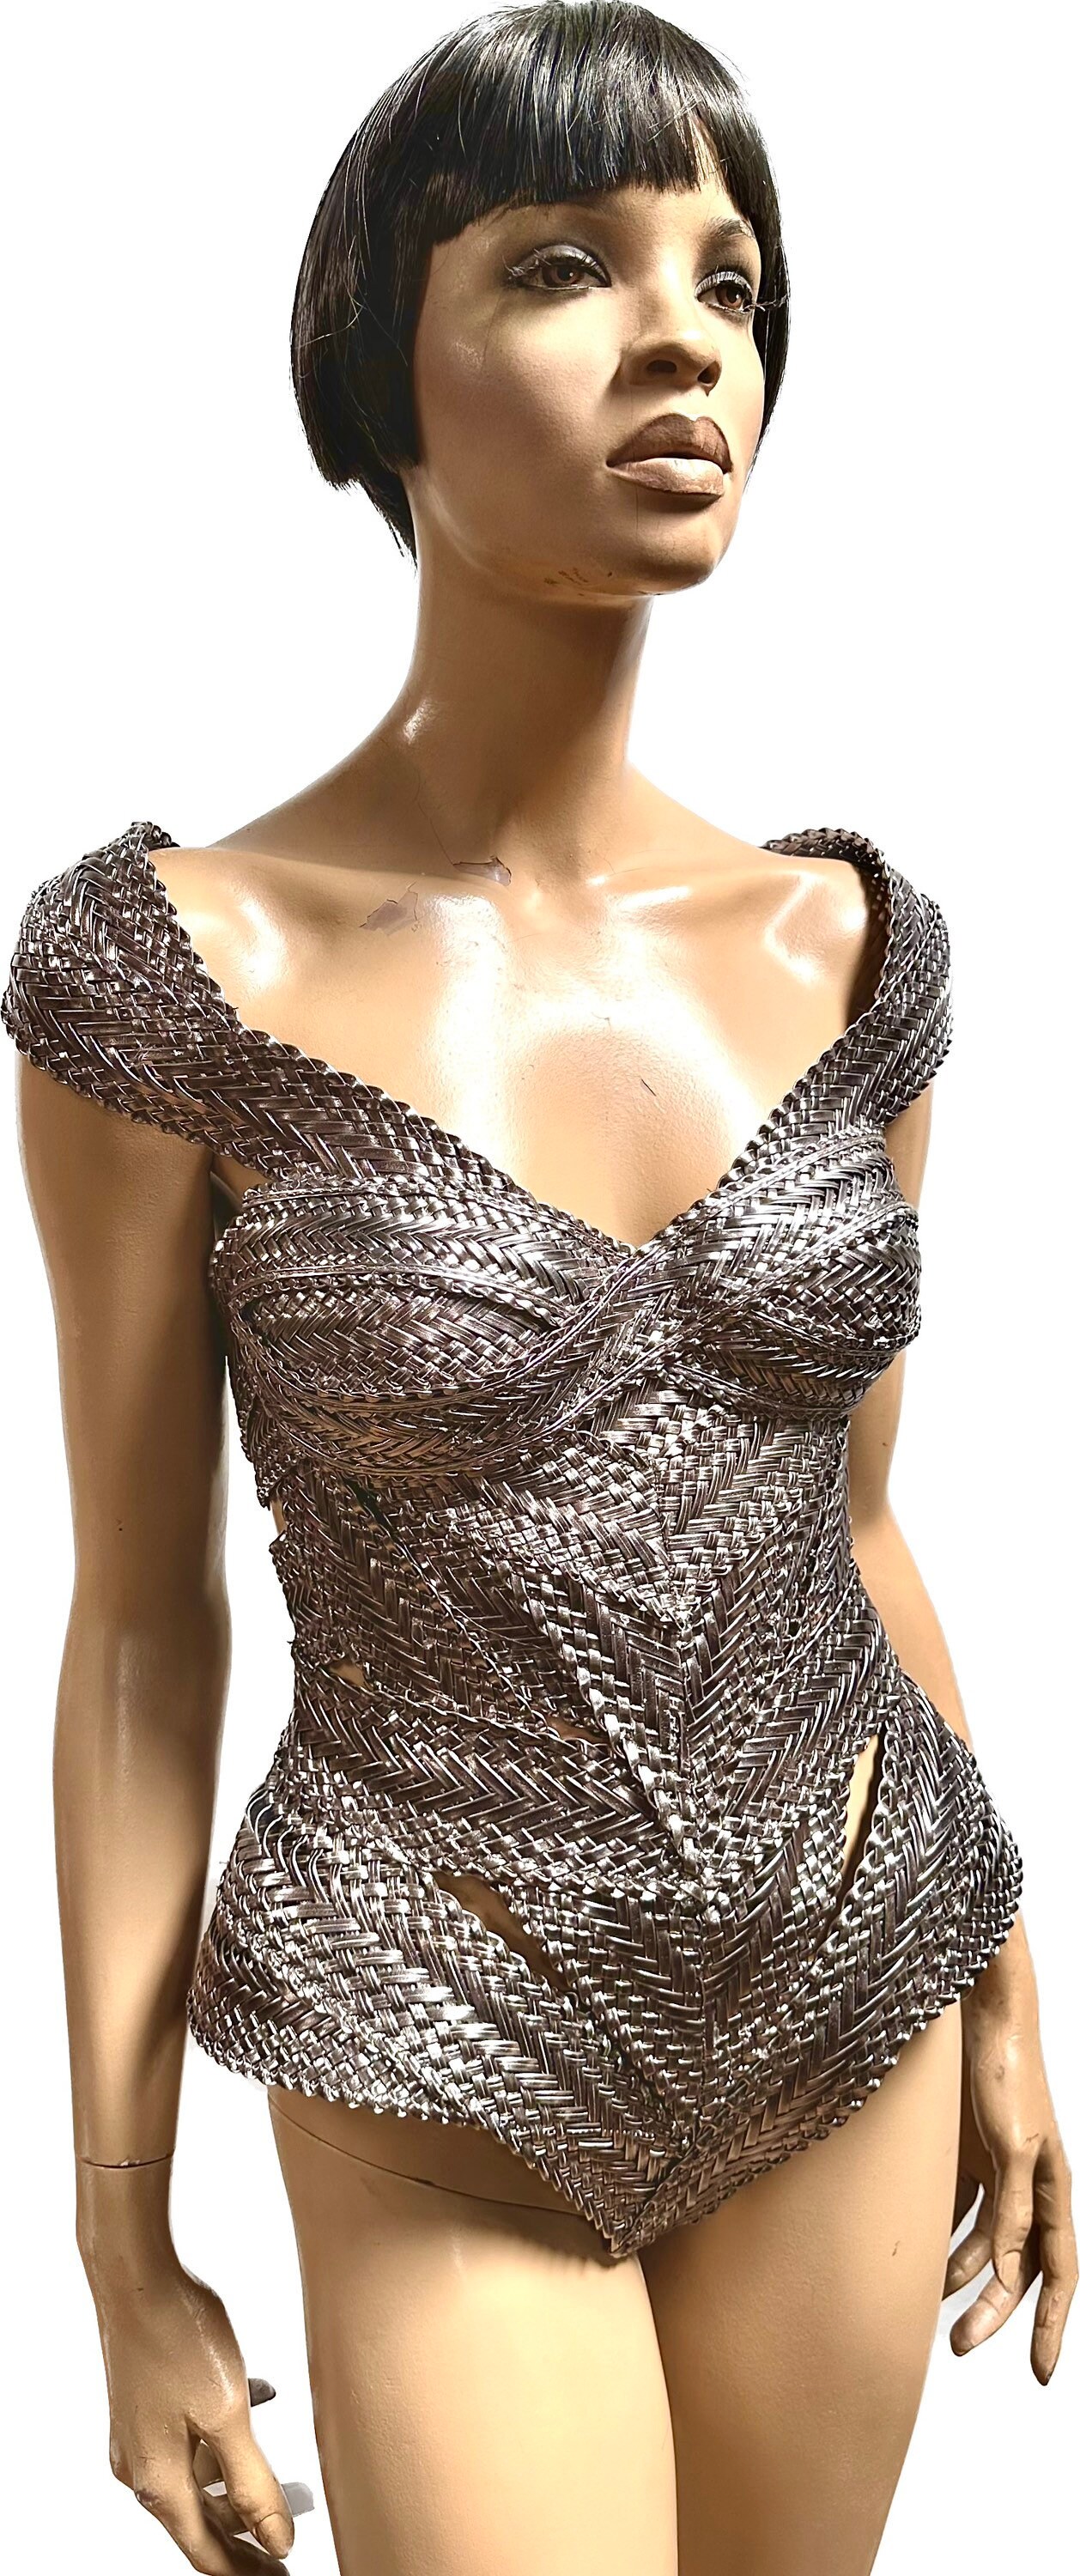 Biomech Woven Silver Corset, Bodysuit, Robot, Cyber, Out of Space